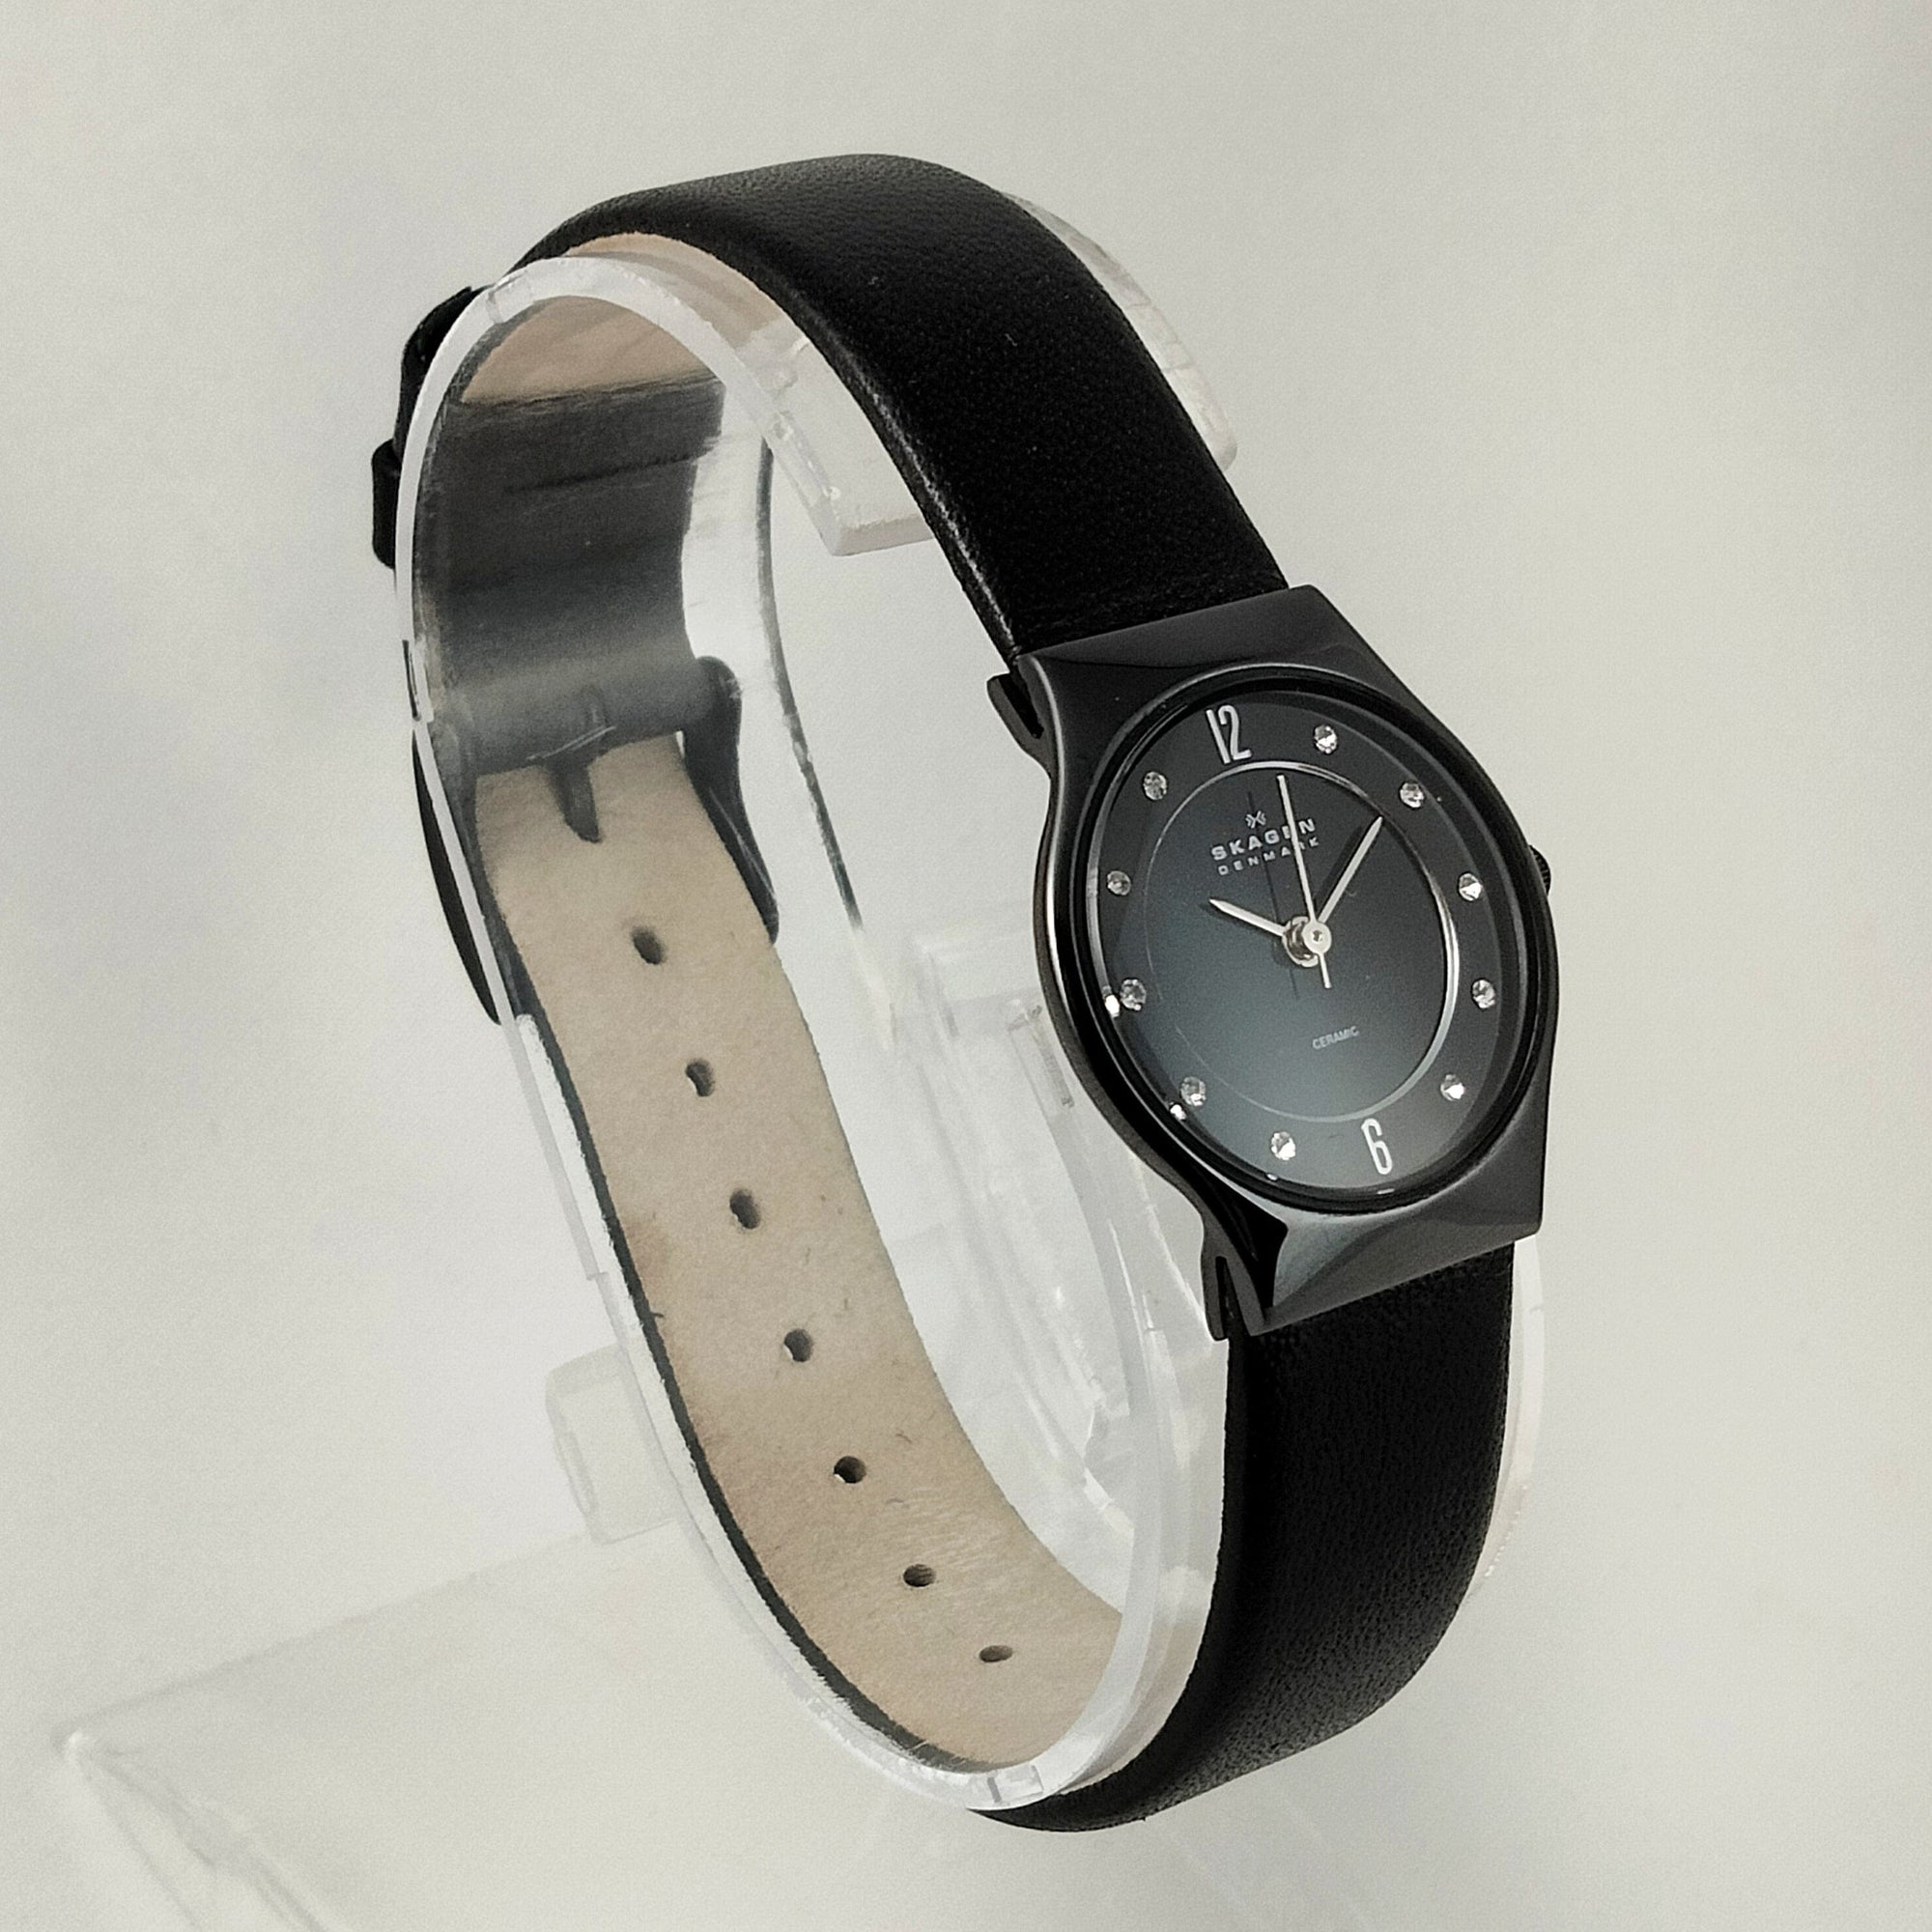 I Like Mikes Mid Century Modern Watches Skagen Women's Ceramic and Stainless Steel Watch, Black Dial with Jewel Hour Markers, Black Genuine Leather Strap